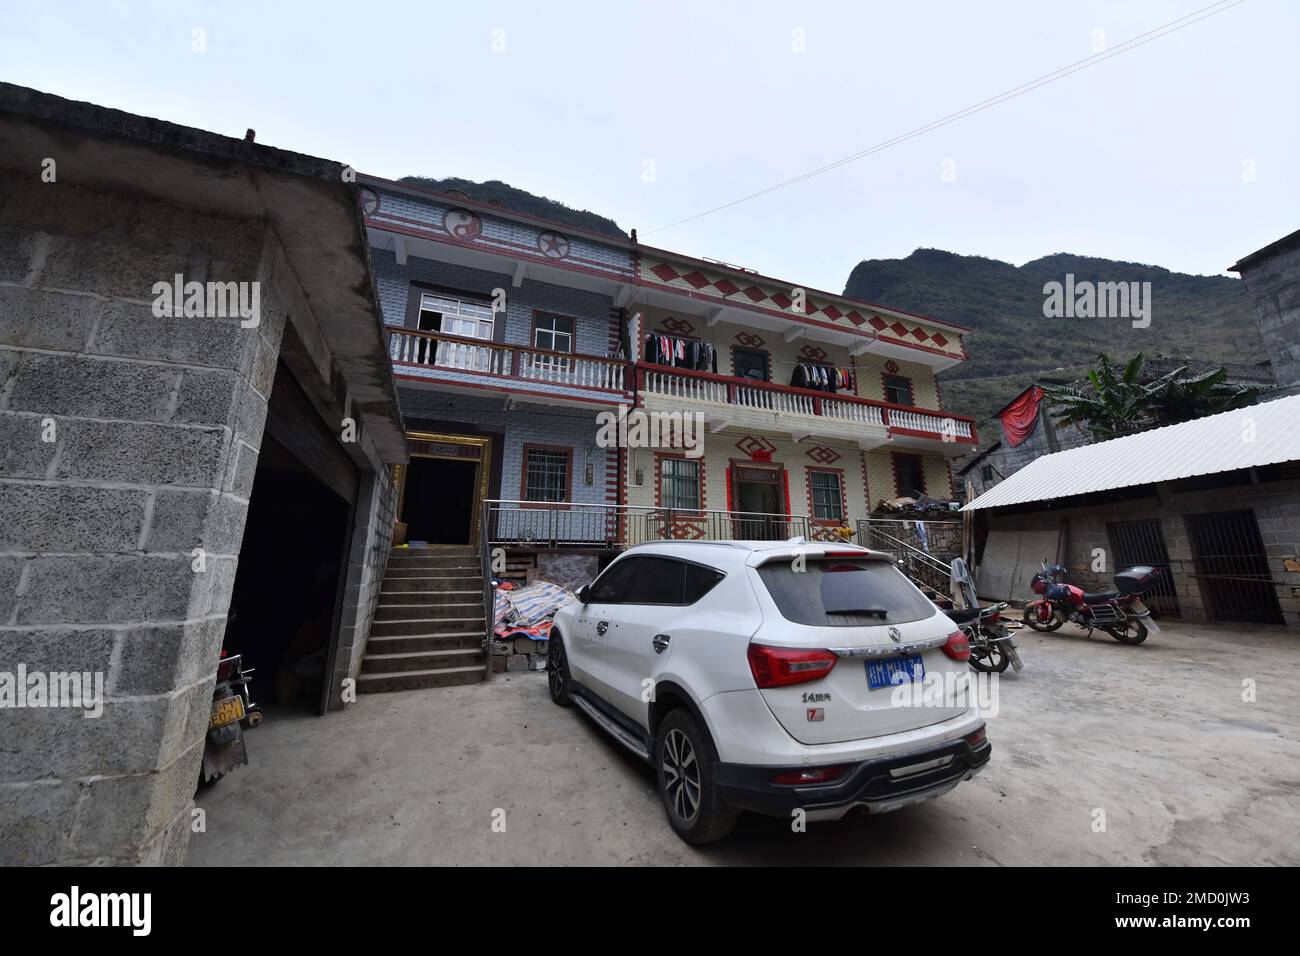 (230122) -- DAHUA, Jan. 22, 2023 (Xinhua) -- This photo taken on Jan. 20, 2023 shows the home of Meng Xuanren and Meng Xuantai in Nongding Village of Bansheng Town, Dahua Yao Autonomous County, south China's Guangxi Zhuang Autonomous Region.  Meng Xuanren and his younger brother Meng Xuantai were nicknamed 'ladder teenagers' because they had to climb mountains and hanging ladders to get to school as children.    They've all grown up and achieved their goals now. Meng Xuanren, 22, is a sophomore at the Liaoning Provincial College of Communications, and Xuantai, 19, works at an auto repair facto Stock Photo